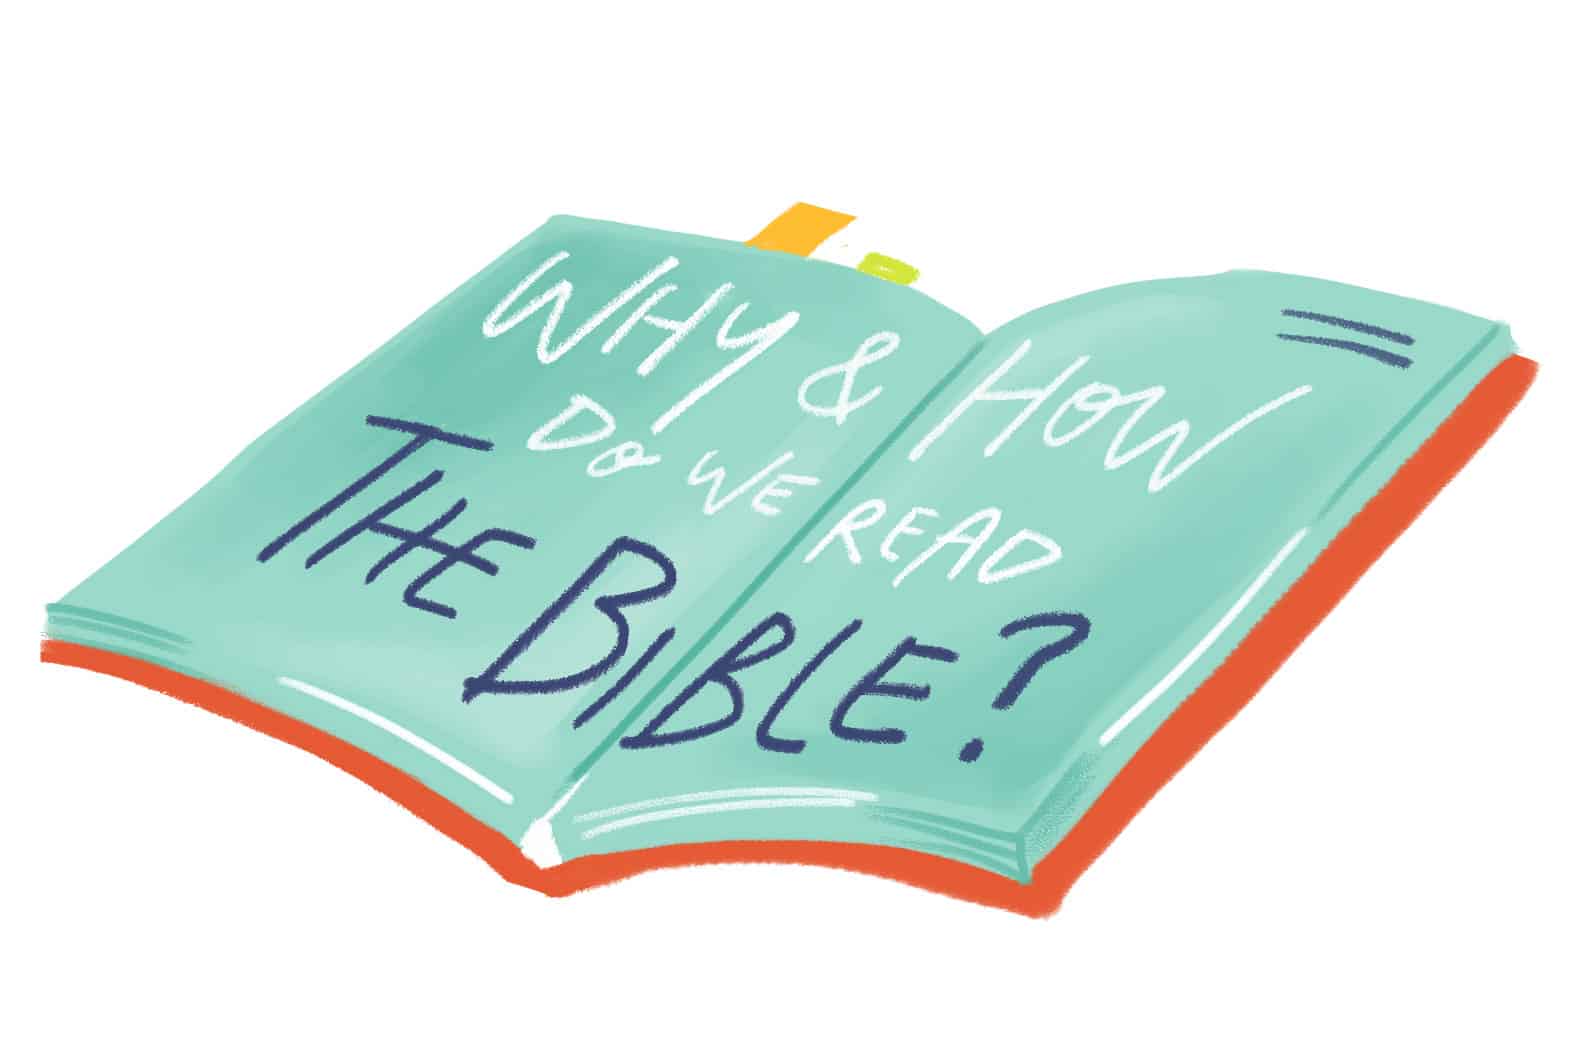 Why-and-how-do-we-read-the-bible